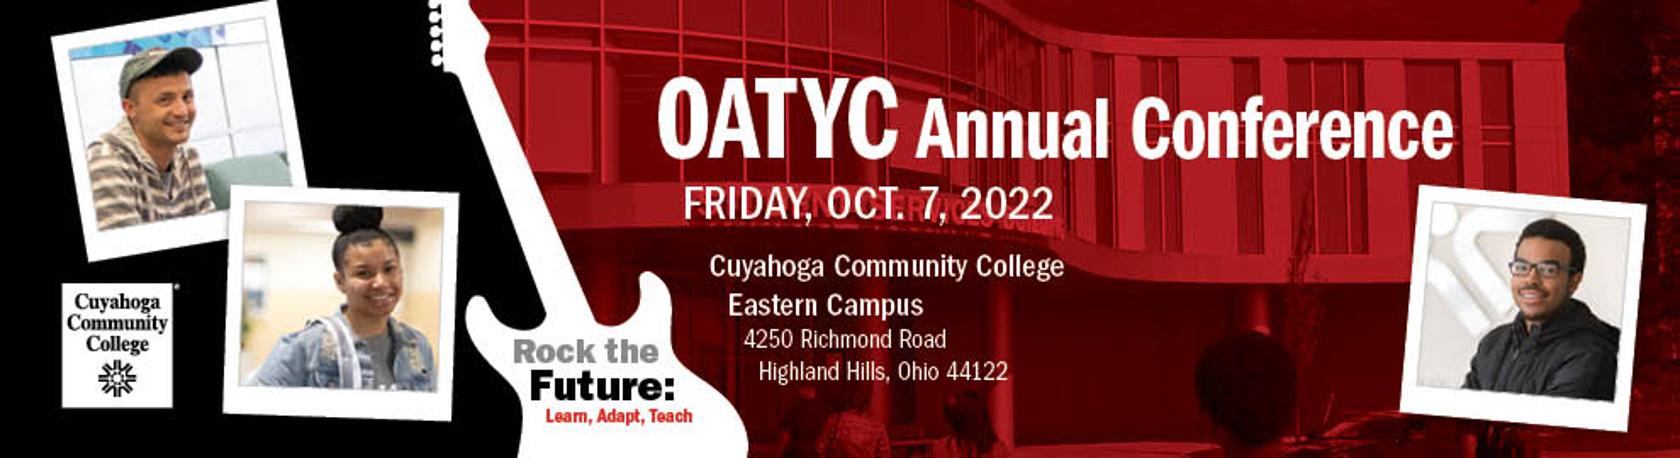 2022 OATYC Annual Conference Friday Oct. 7, 2022